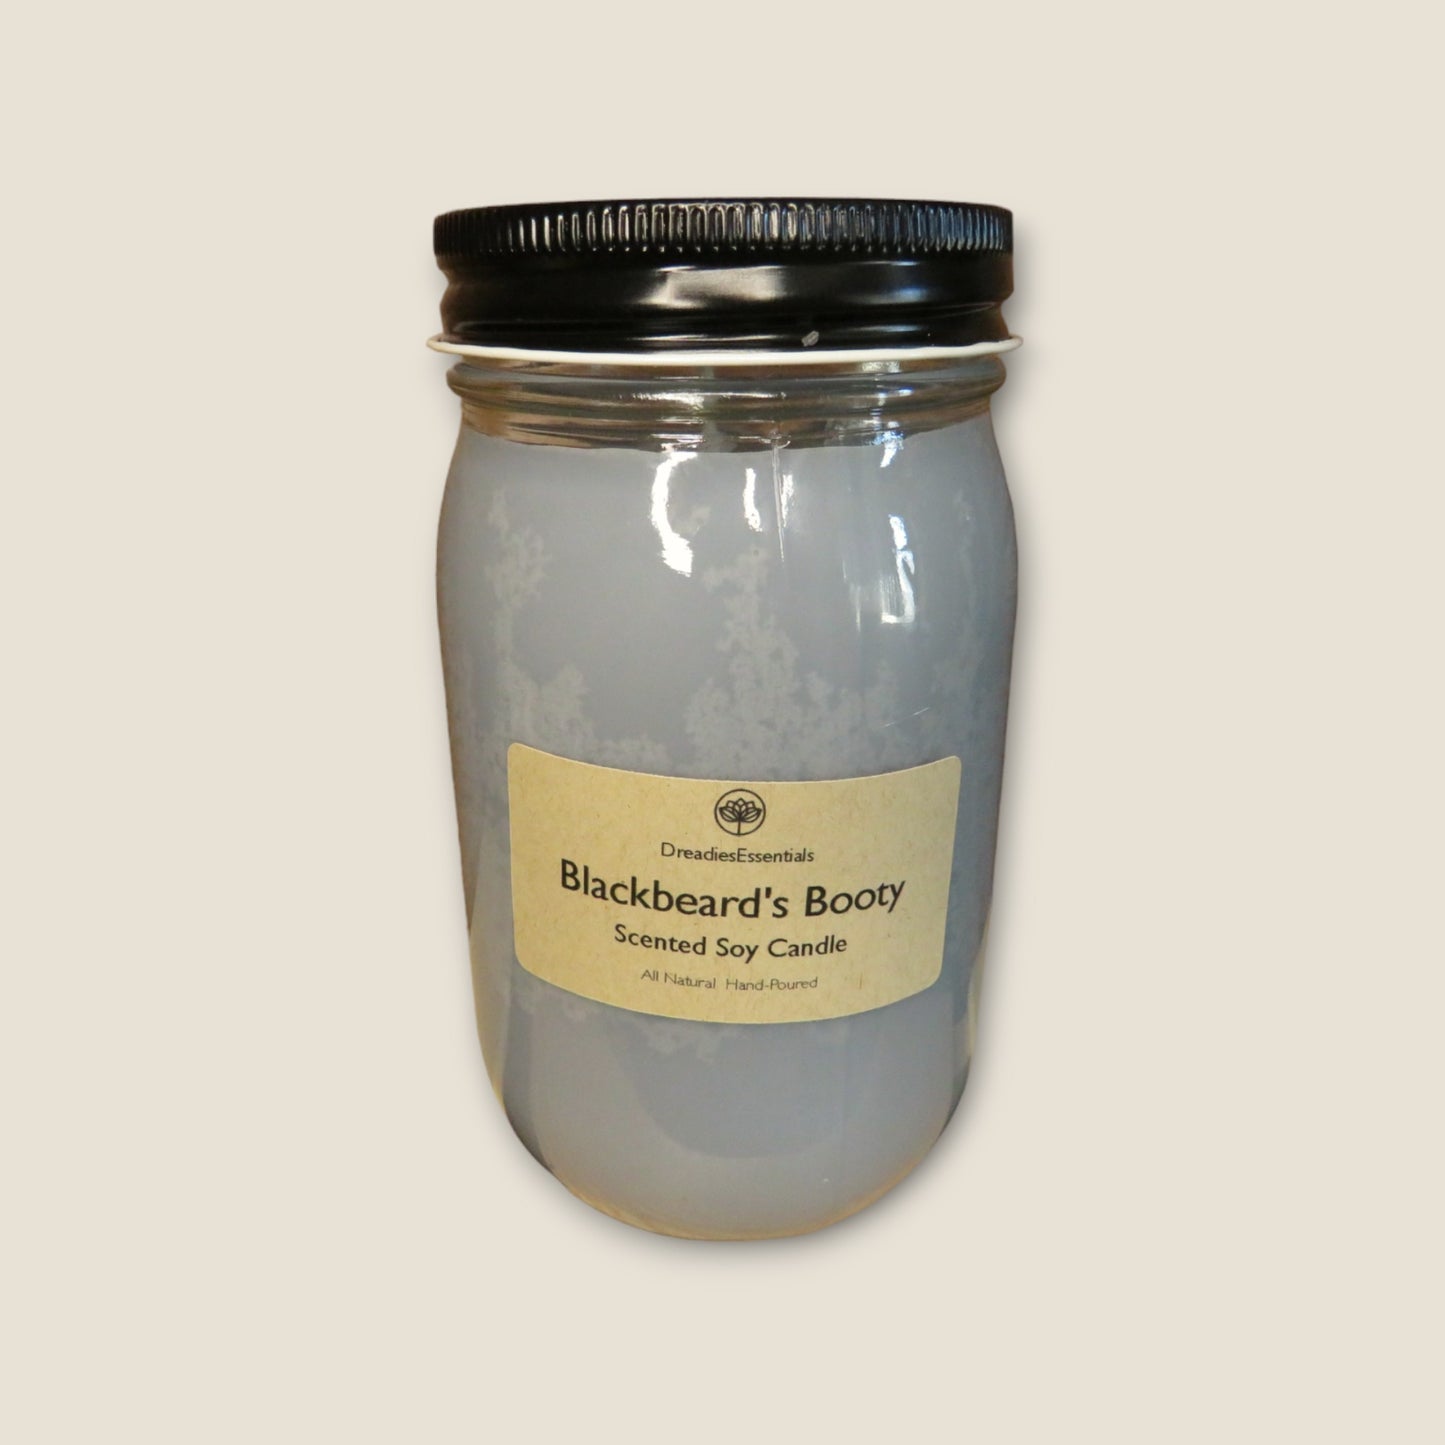 Blackbeard's Booty Scented Soy Candle